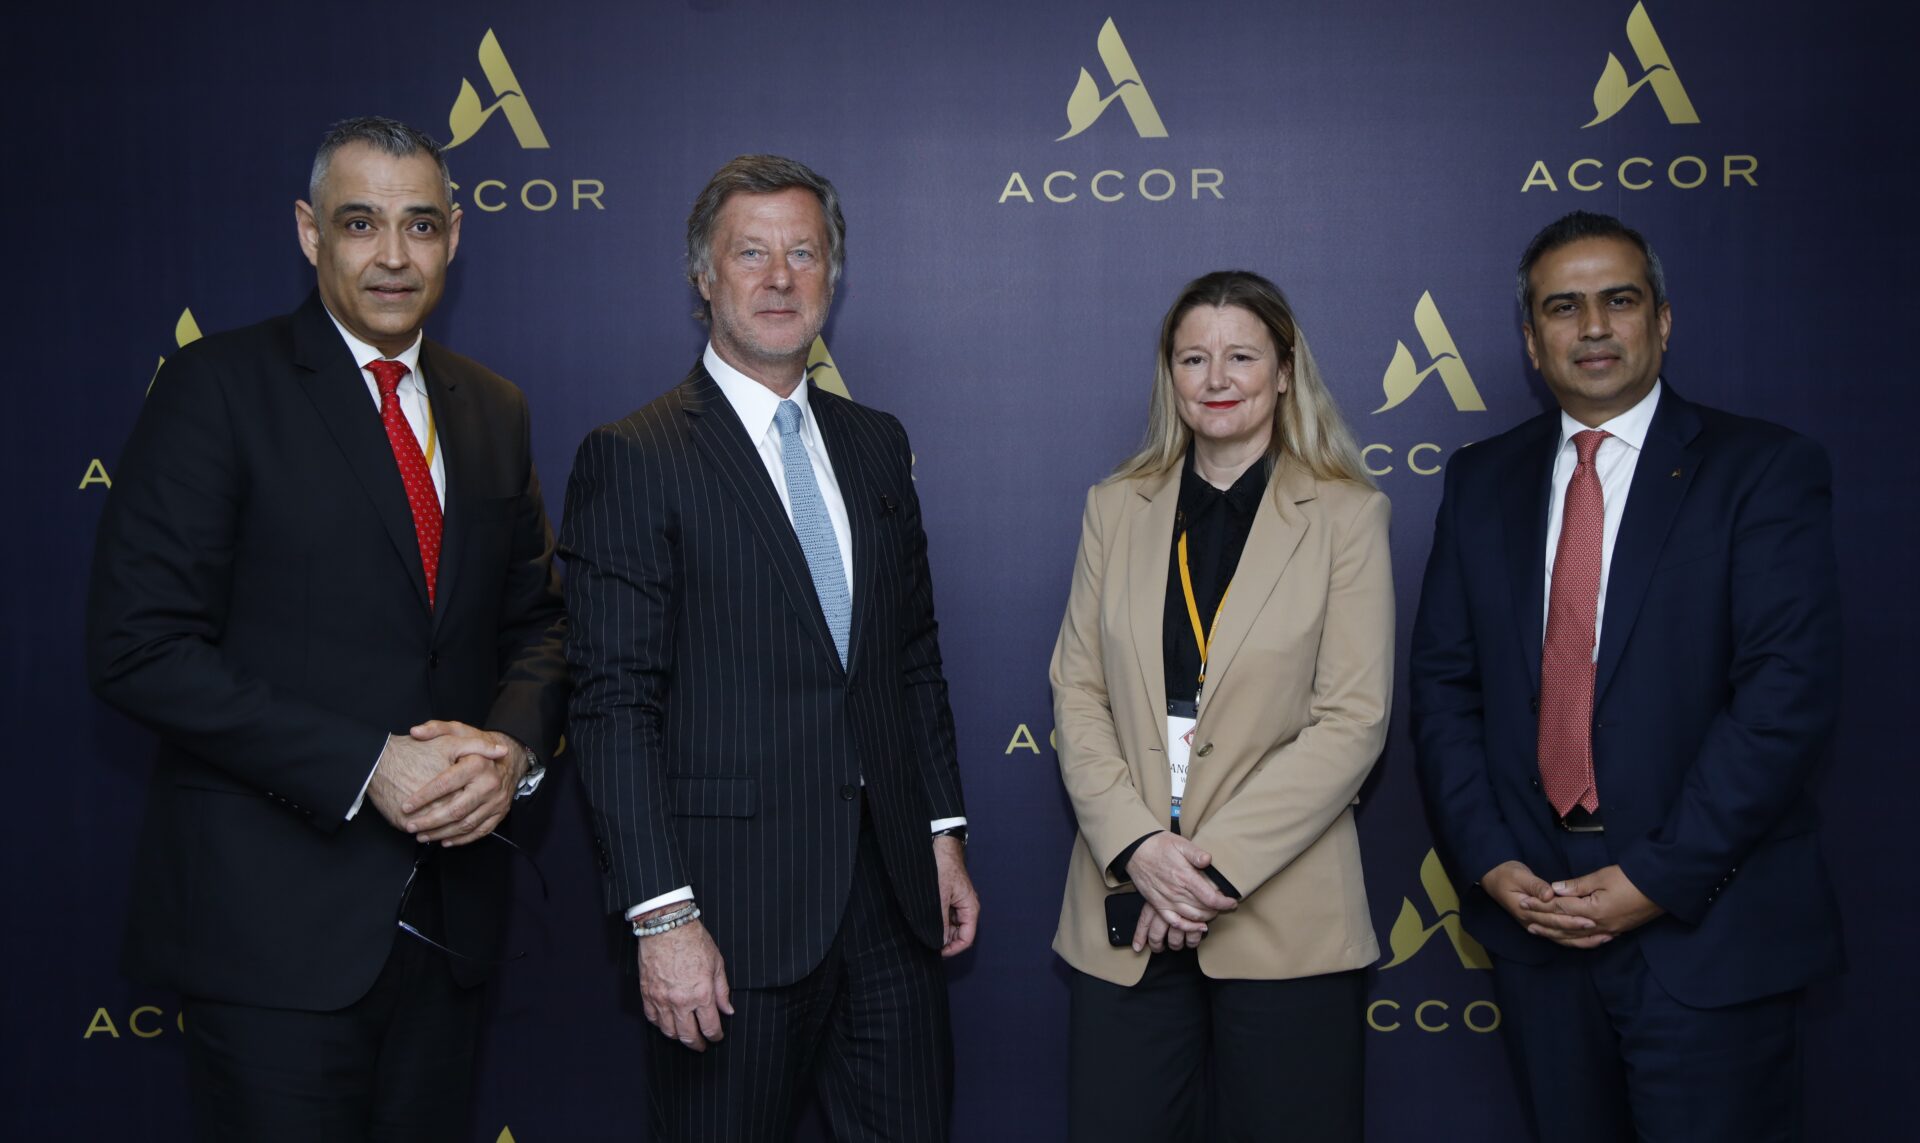 ISH and Sommet Education inks pact with Accor for Talent Development Initiative